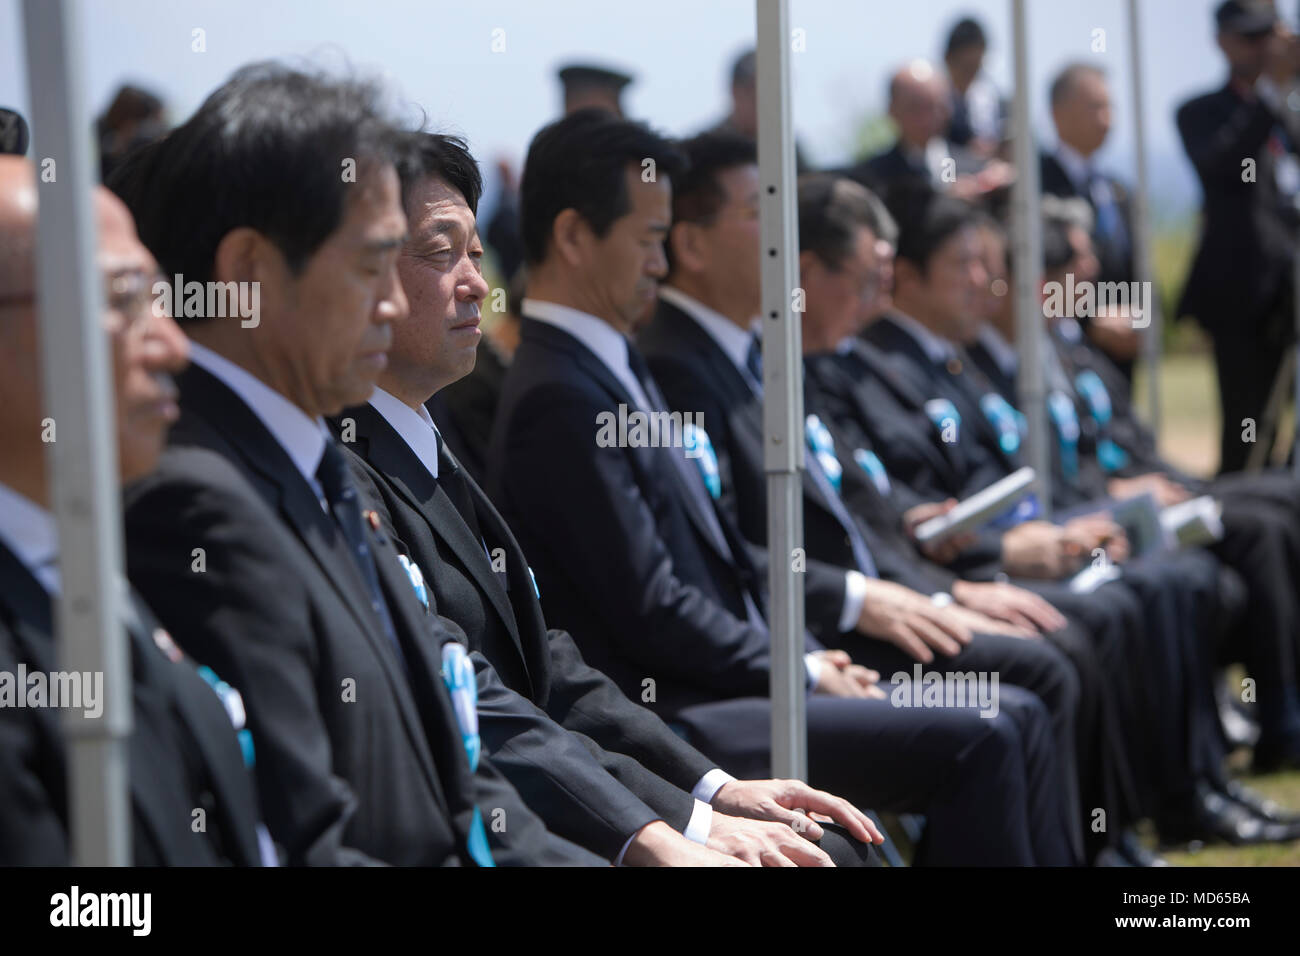 Yoshitaka Shindo, a member of the Japanese house of Representatives and grandson of General Tadamichi Kuribayashi, the commander of the Japanese forces that defended Iwo Jima, listens along with his fellow countrymen as Mr. Katsunobu Kato, the Japanese Minister of Health, Labour and Welfare, addresses the audience during the 73rd Reunion of Honor March 24, 2018 at Iwo To, Japan. The Reunion of Honor was created to commemorate those who fought during the Battle of Iwo Jima. (U.S. Marine Corps photo by Lance Cpl. Jamin M. Powell) Stock Photo